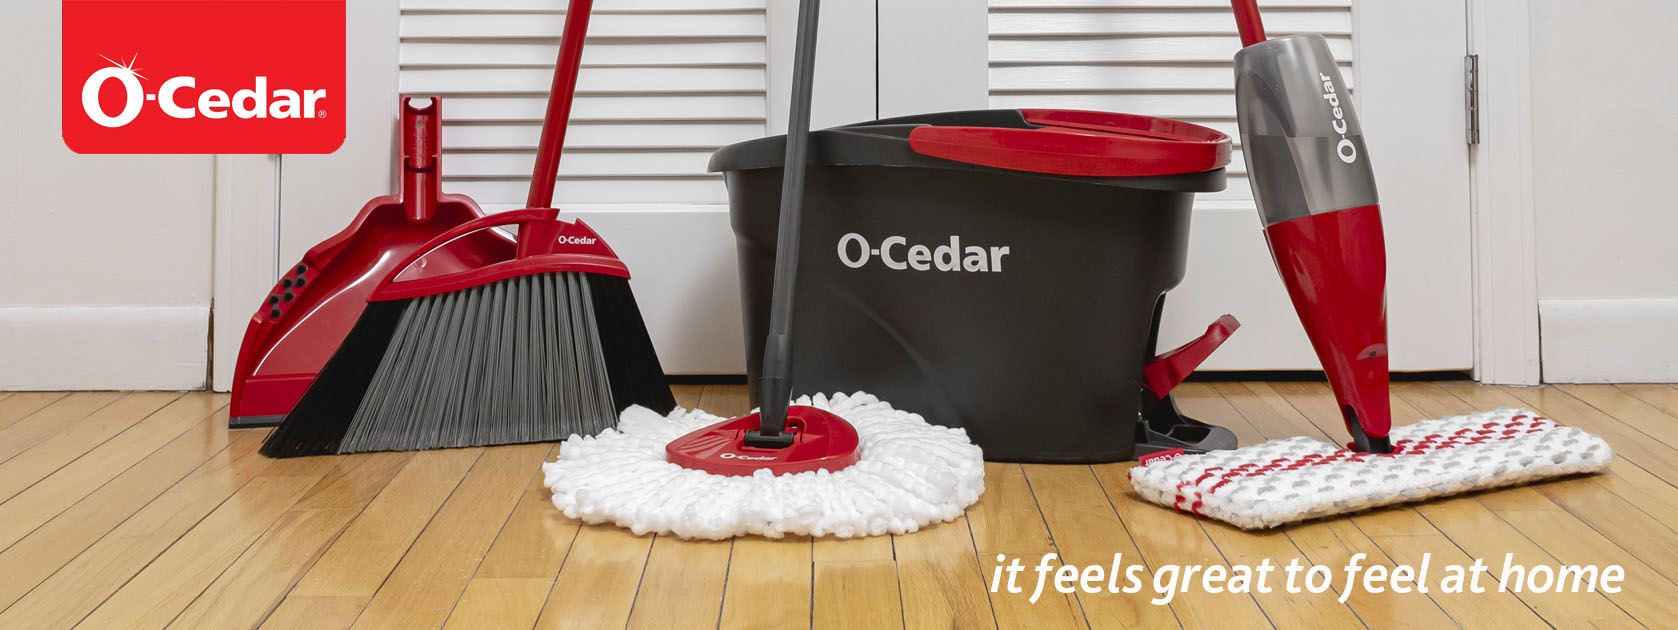 TikTok Made Me Buy This Mop, and Now I'm Mopping's Number One Fan